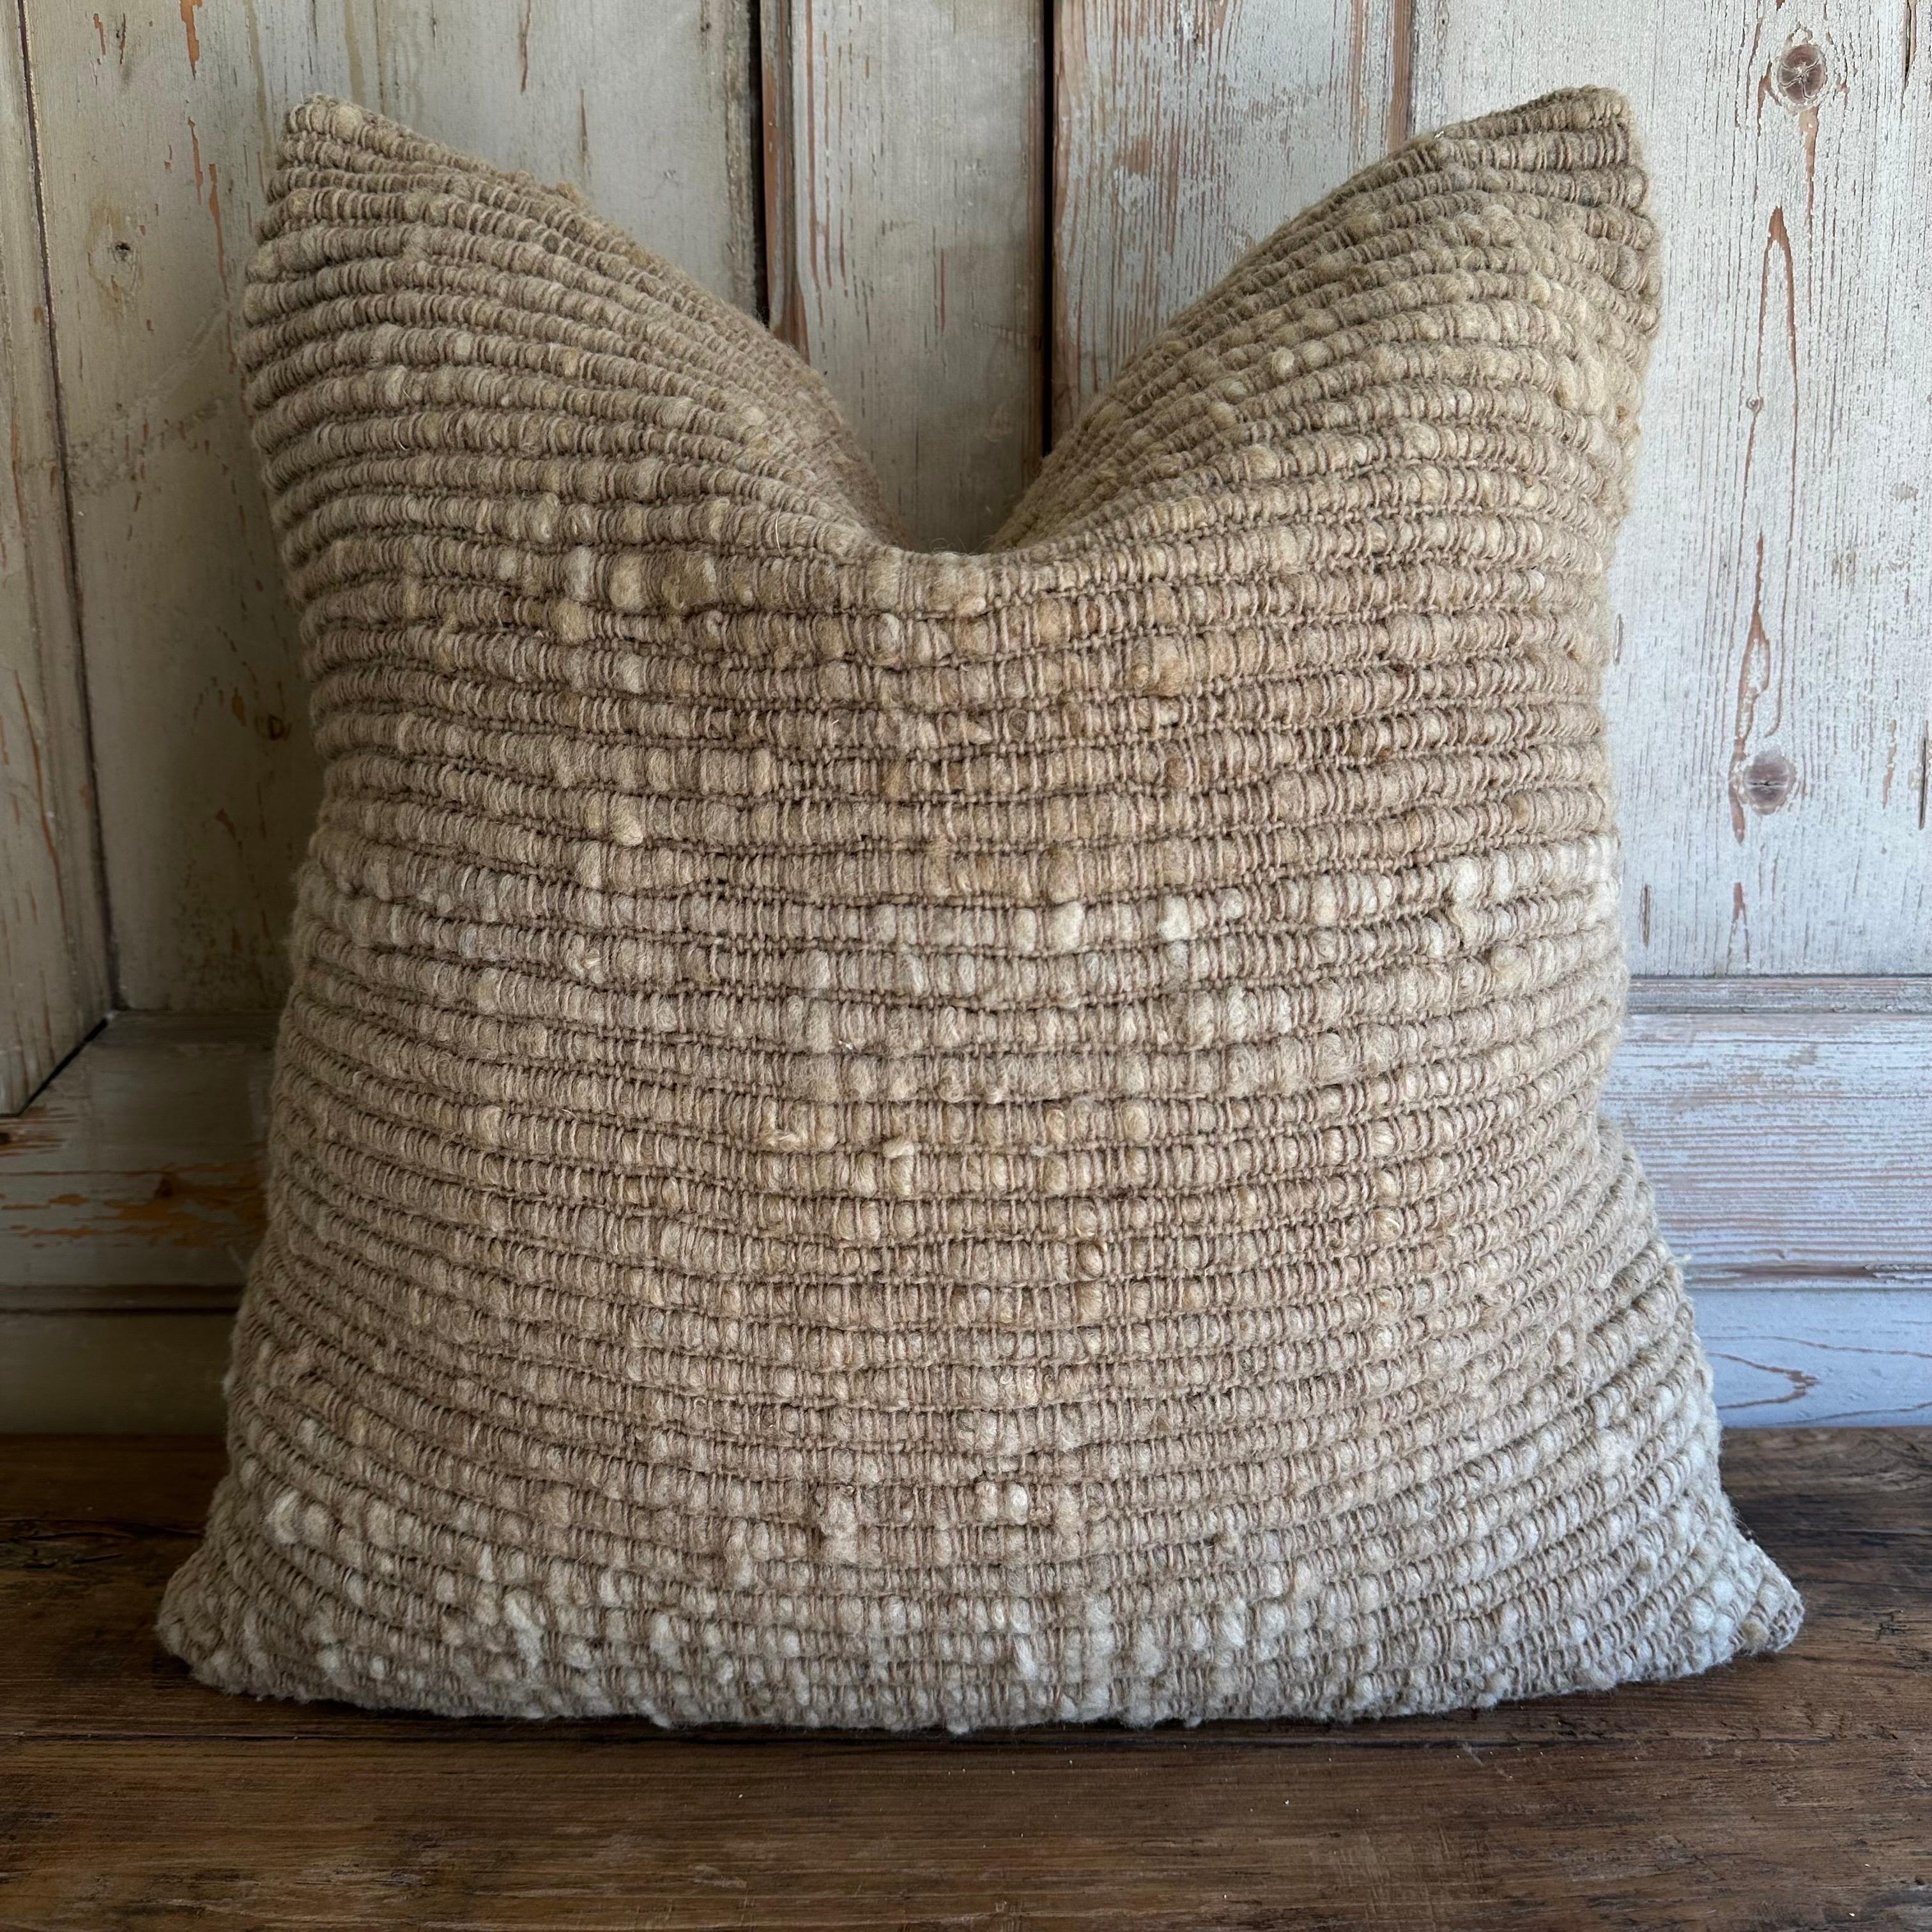 Hand made wool textured pillow
Color: Gold/Moss (a warm golden oak/ clay color with warm natural tones)
Size: 24” x 24”
All of our products are commissioned and handmade by the craftswomen of Chiloé. The textiles are made with 100% wool from